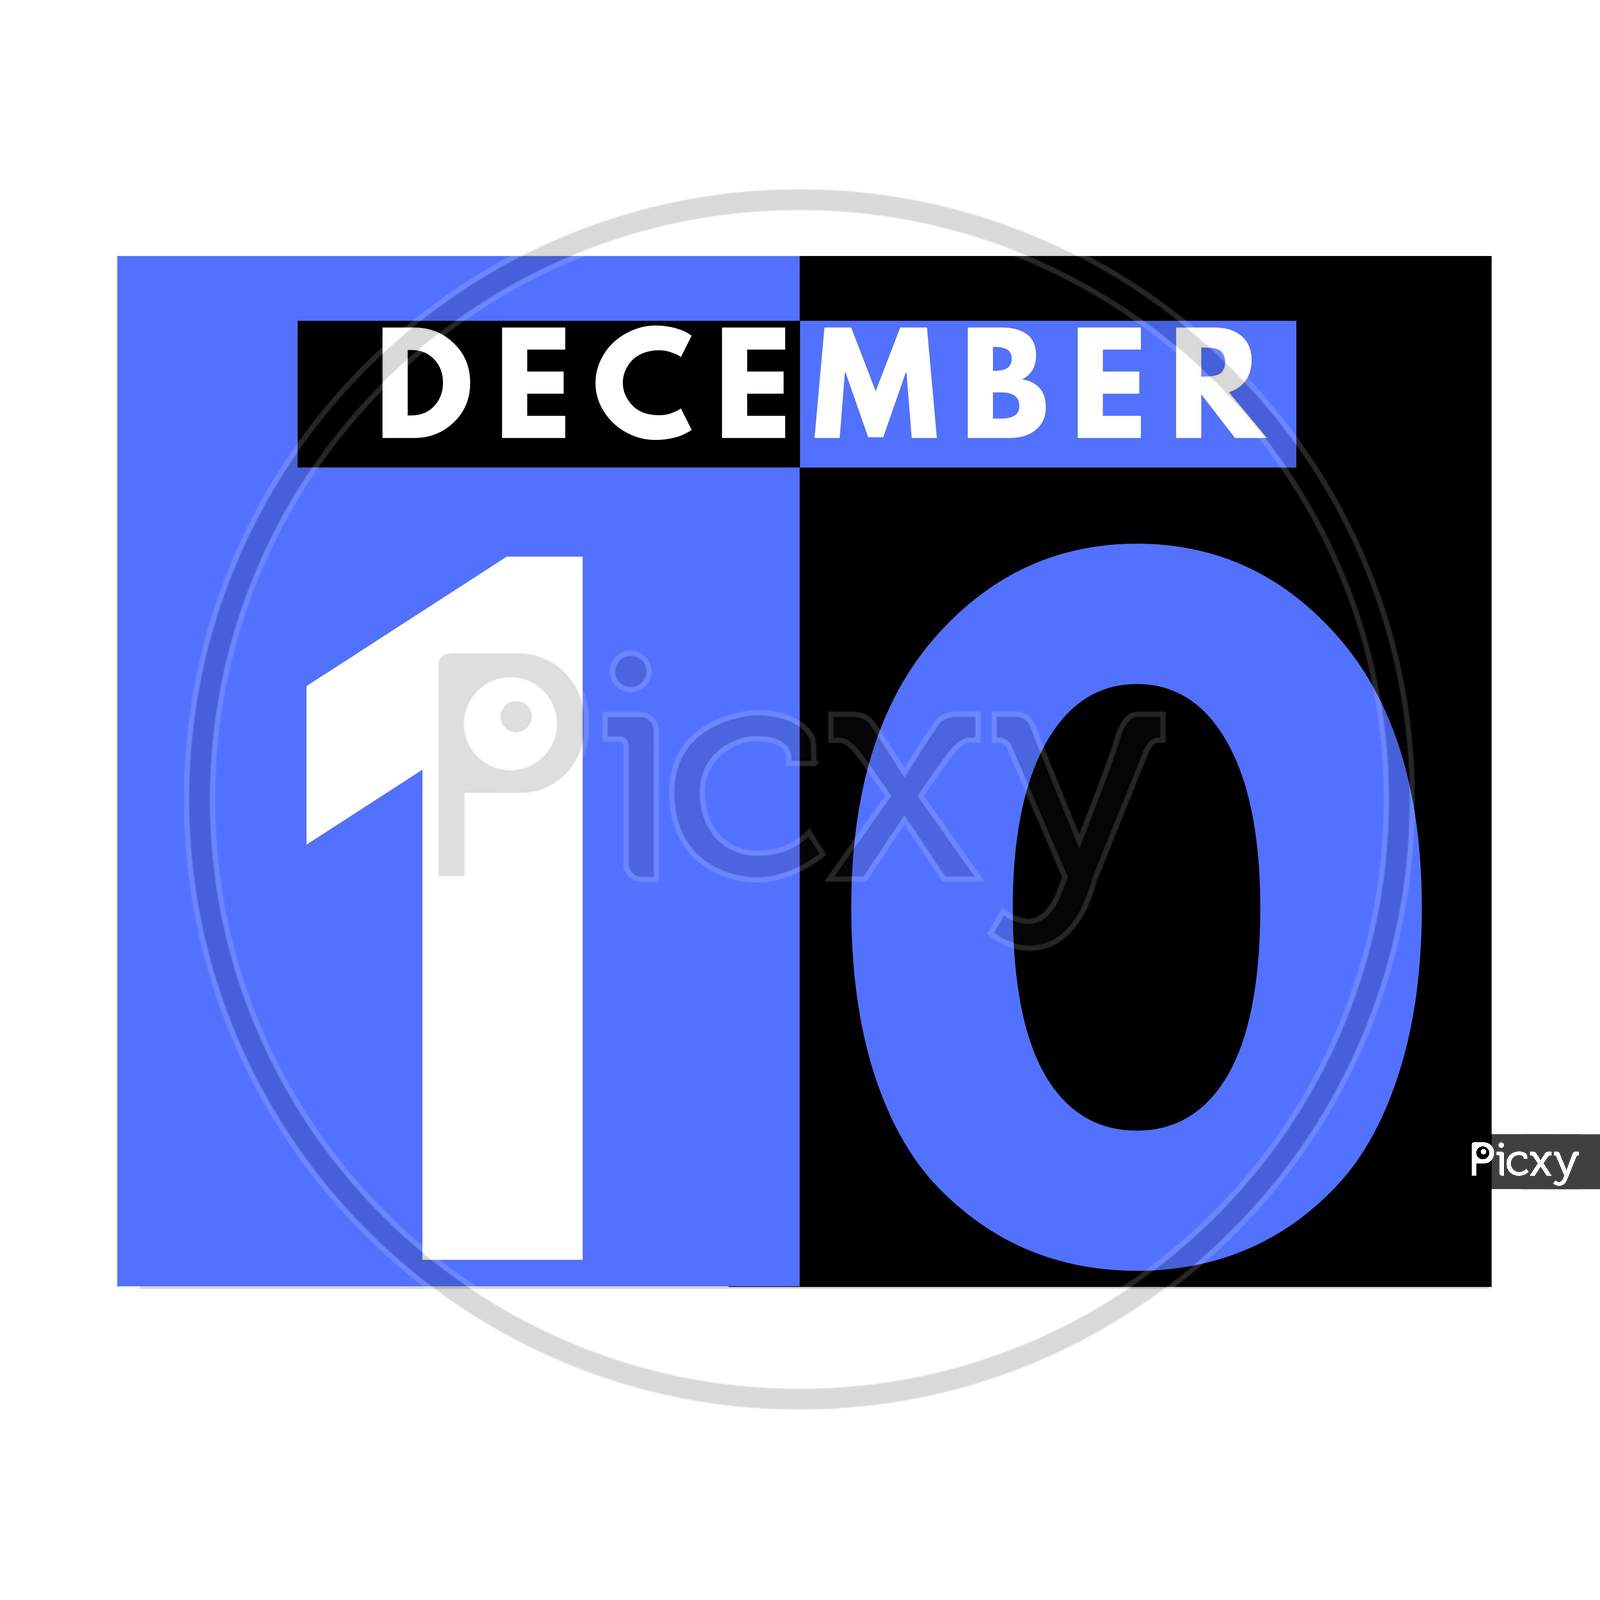 December 10 . Modern Daily Calendar Icon .Date ,Day, Month .Calendar For The Month Of December